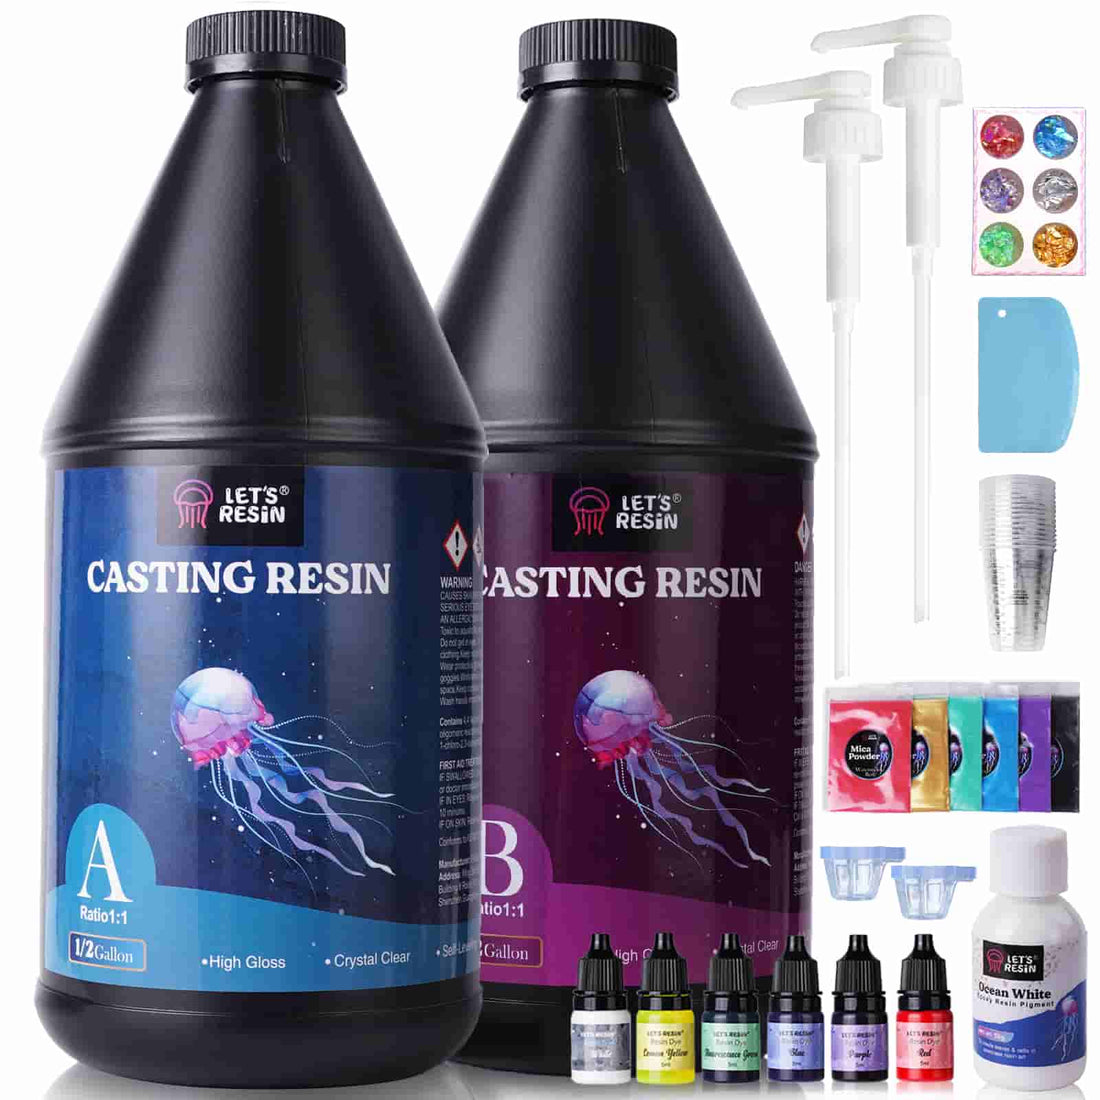 LET'S RESIN Fast Curing Epoxy Resin Kit-4 Hours Demold 20OZ Quick Curing &  Bubble Free Epoxy Resin Crystal Clear Epoxy Resin for Craft Art Resin  Supplies with Foil Flake Resin Cup Stir